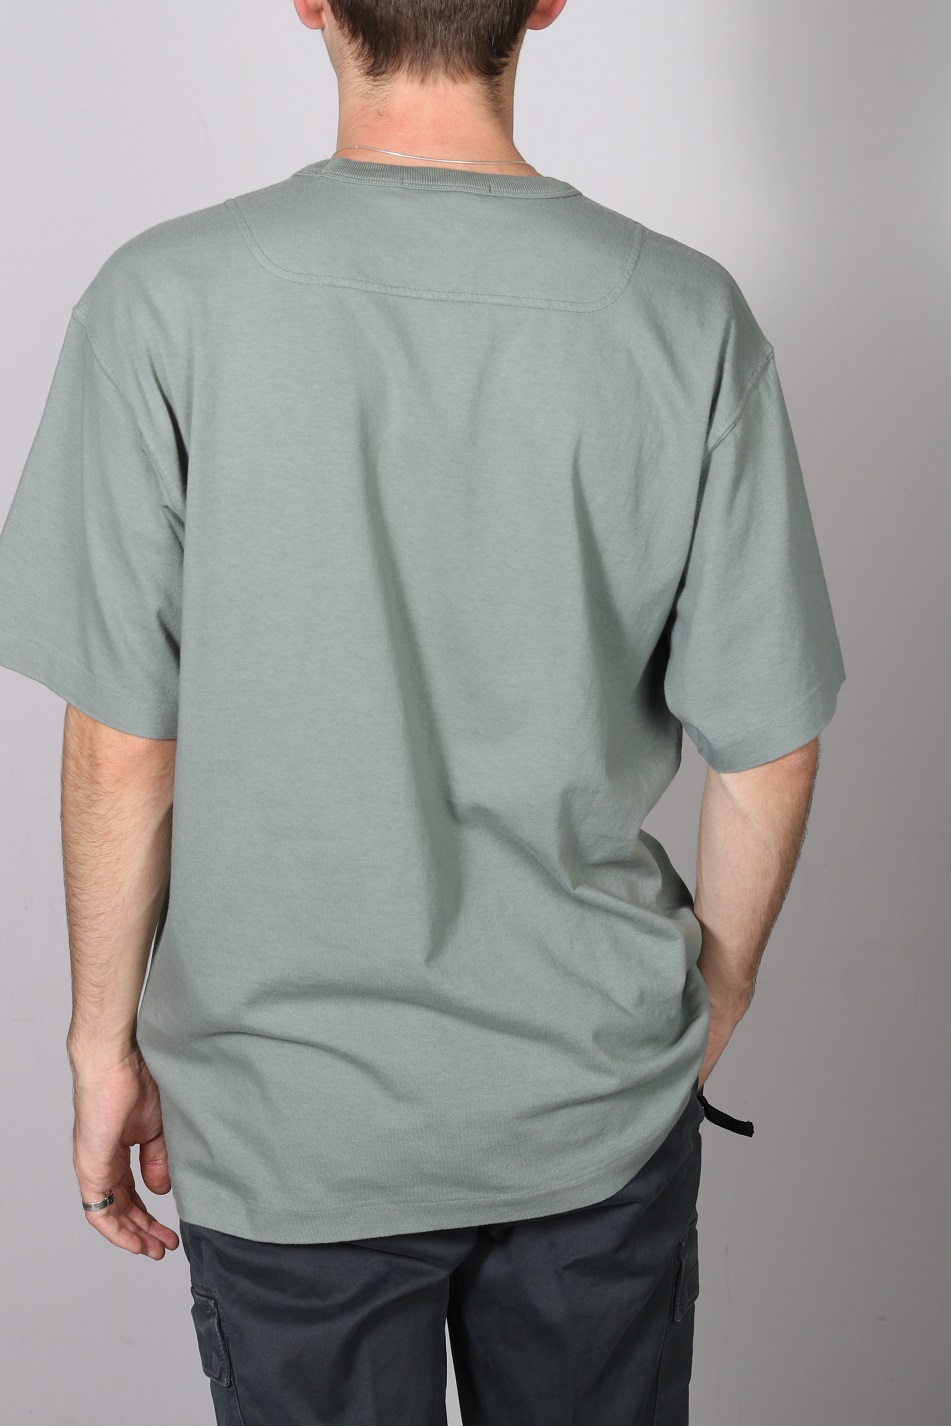 STONE ISLAND Oversized Stamp T-Shirt in Sage M